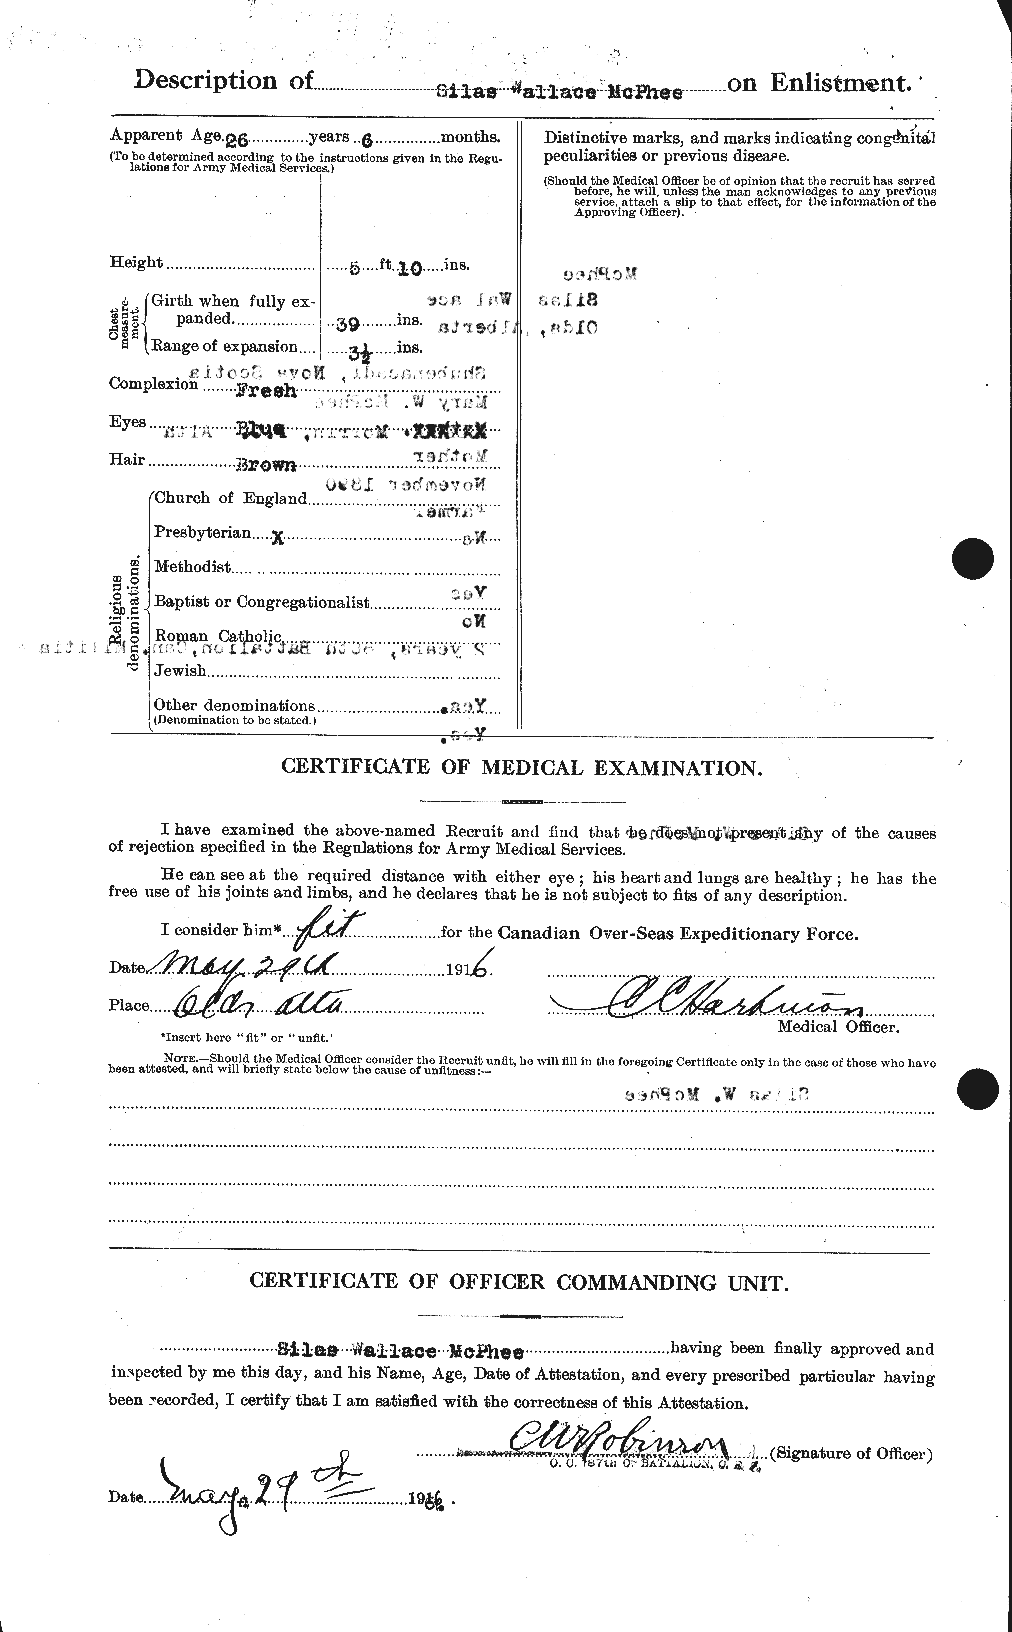 Personnel Records of the First World War - CEF 541192b